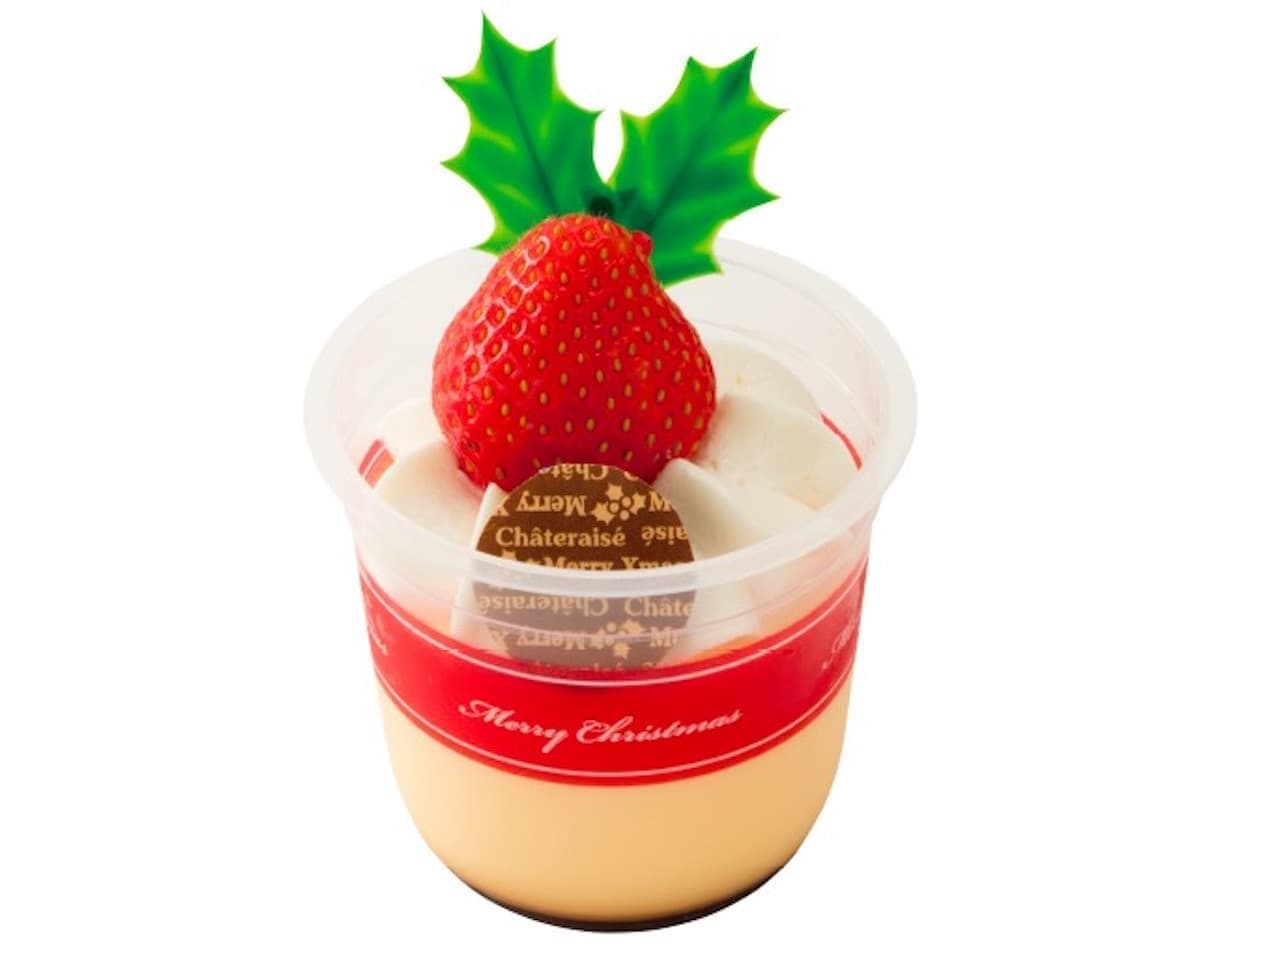 Chateraise "Xmas Pudding Cup"